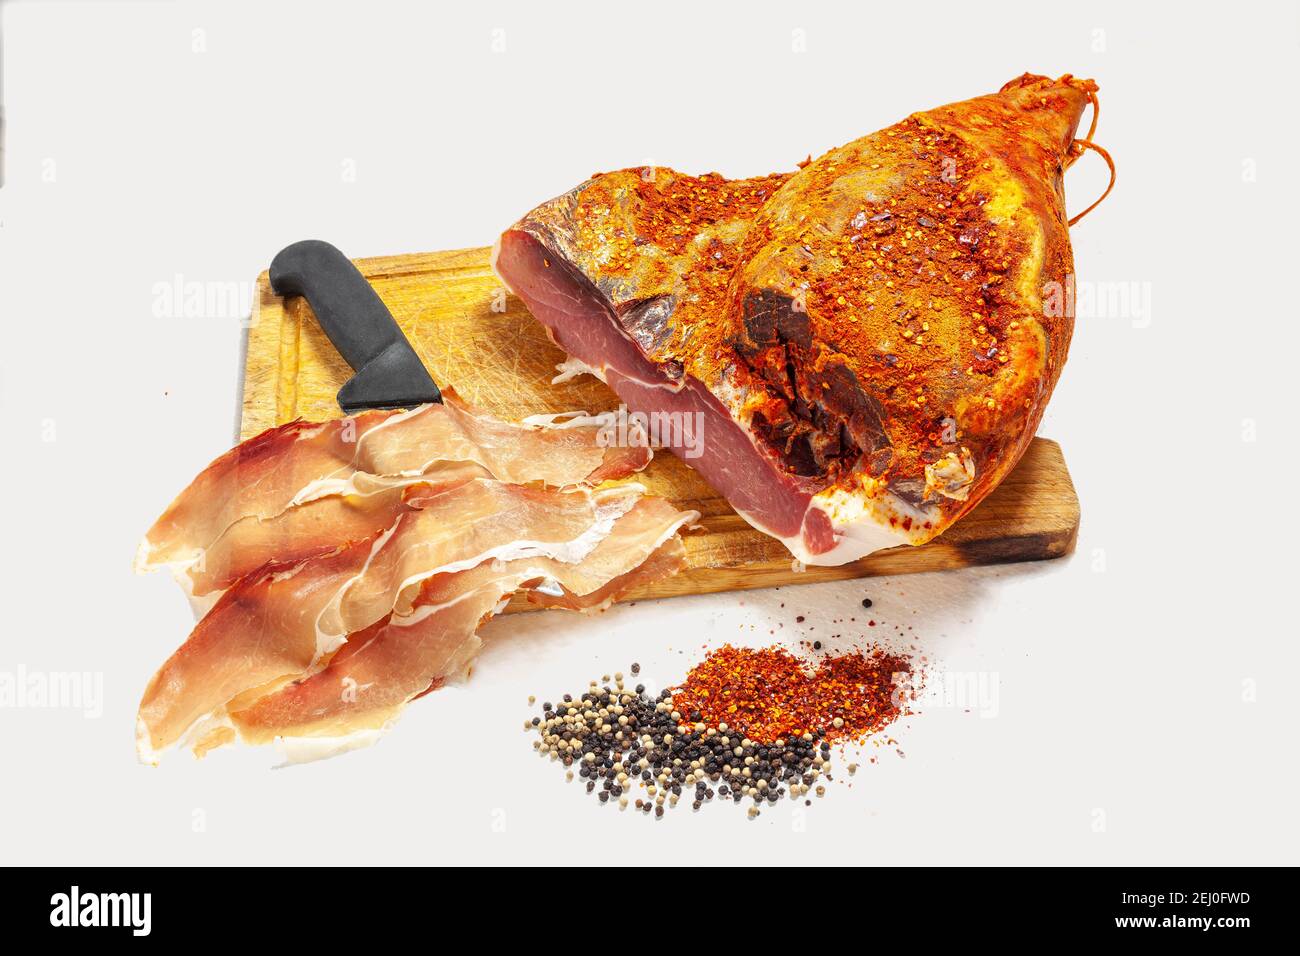 boneless ham, with red pepper and black pepper, cut into slices. On white background. Stock Photo